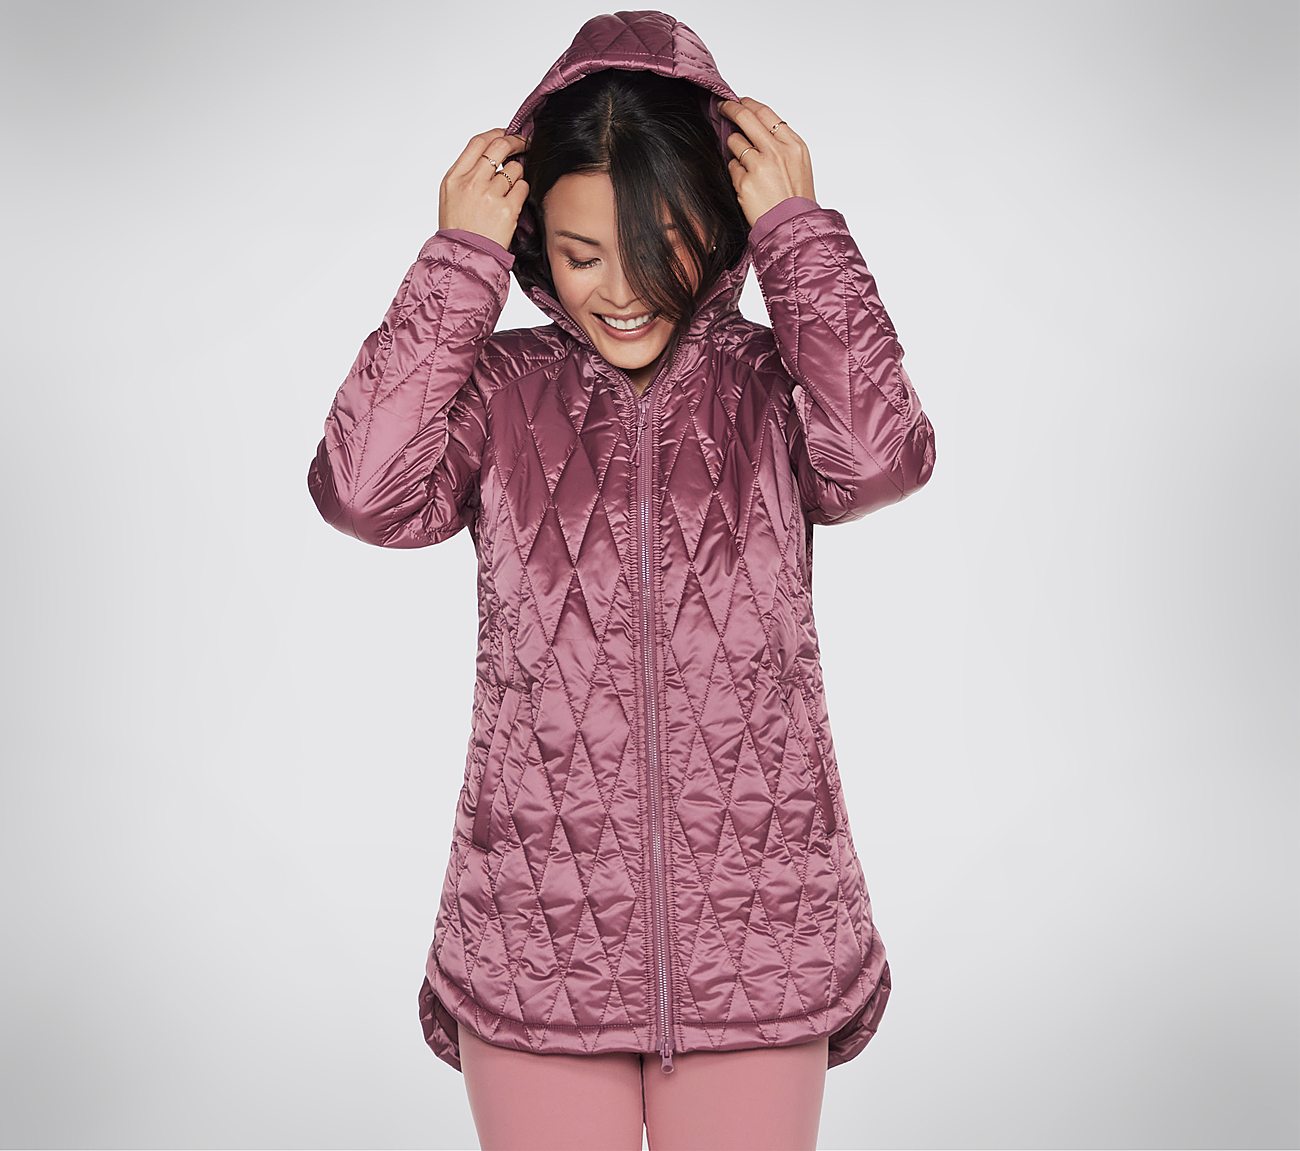 I tried this quilted jacket from MPG Sport, and here's what I thought